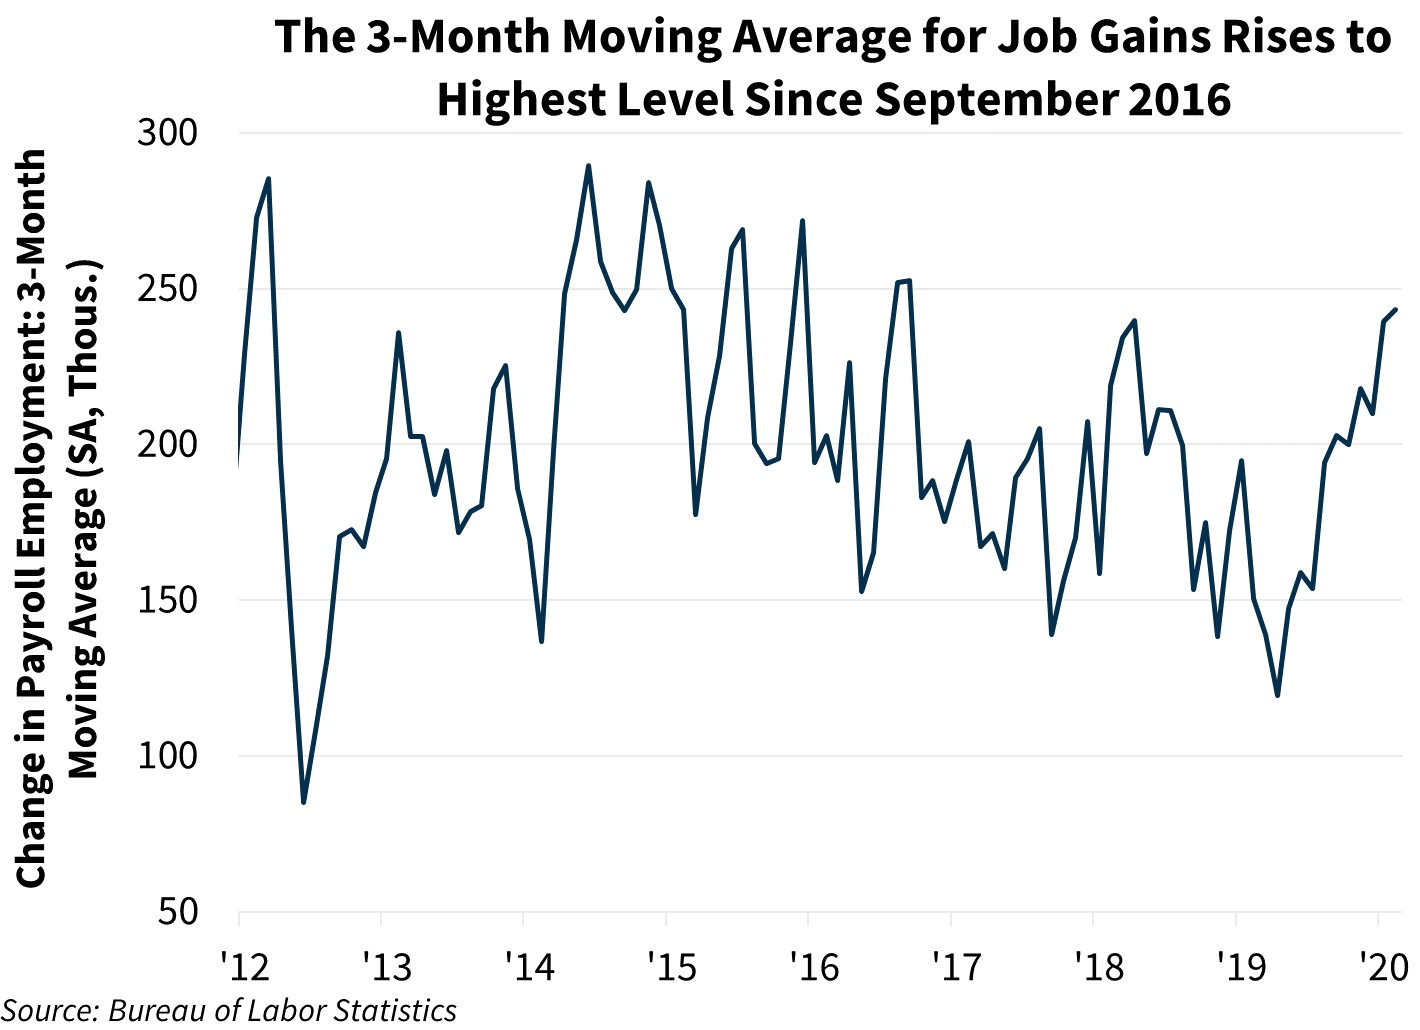 The 3-Month Moving Average for Job Gains Rises to Highest Level Since September 2016